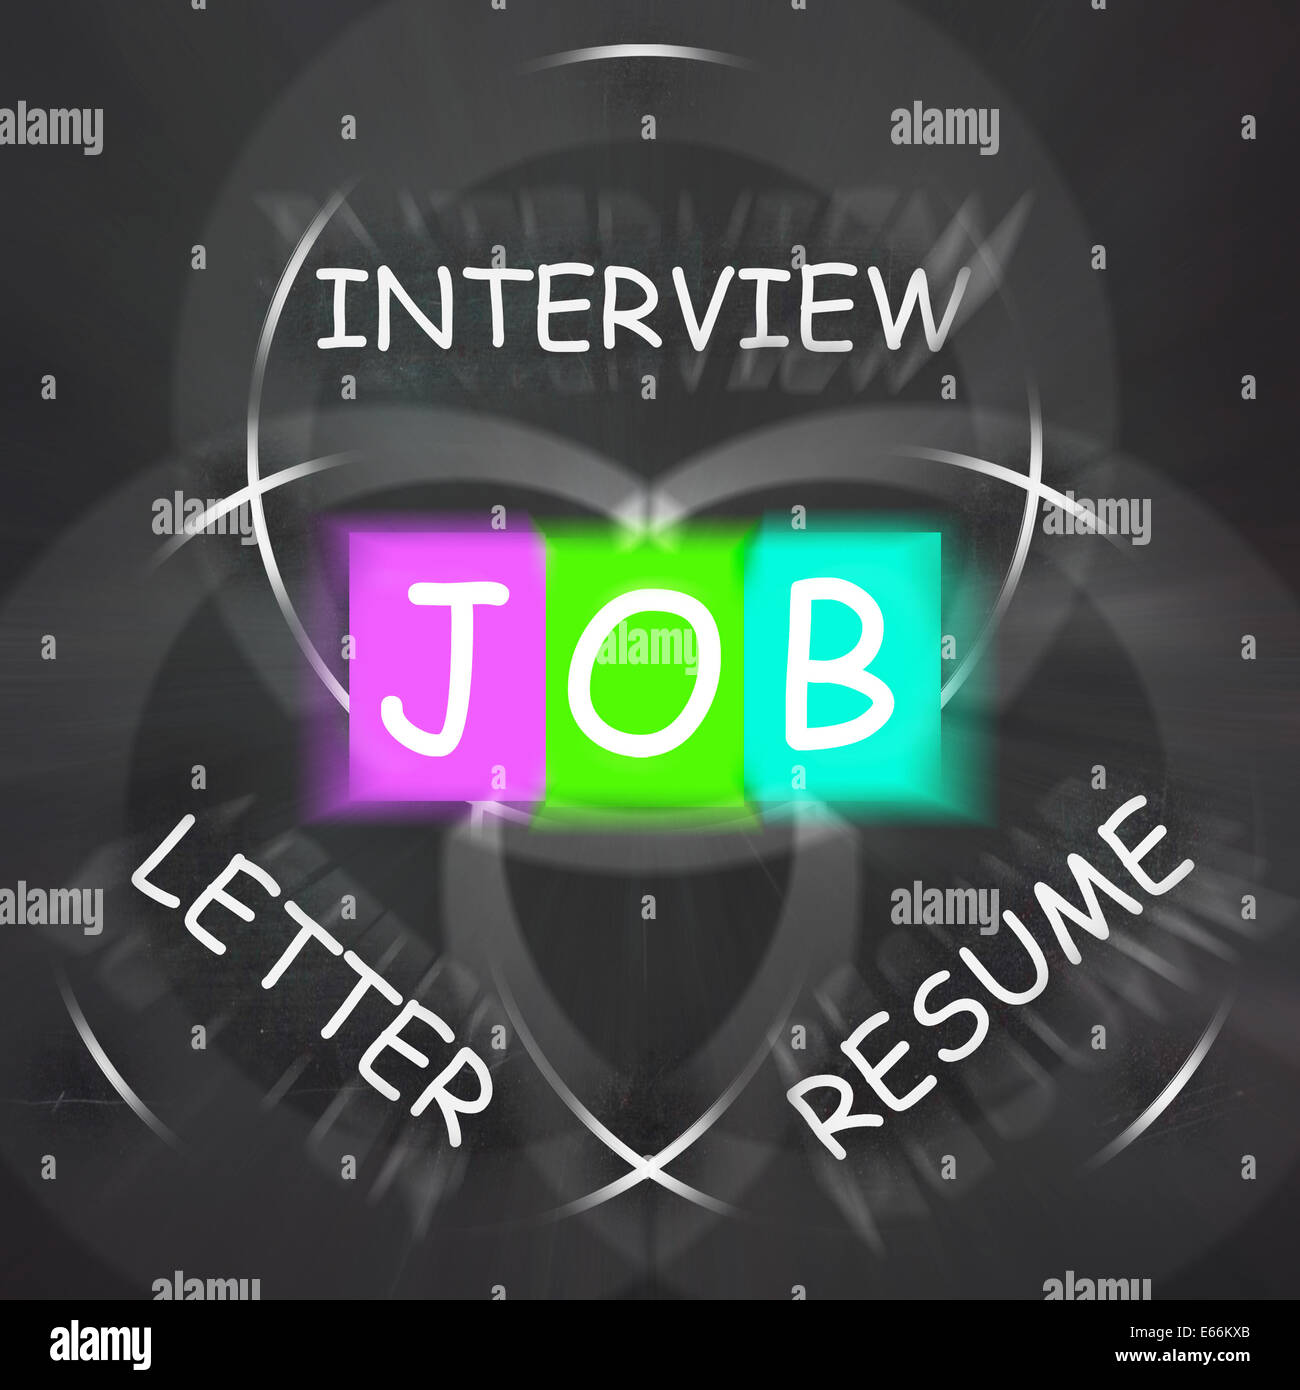 JOB On Blackboard Displaying Work Interview Recommendation Letter Or Resume Stock Photo